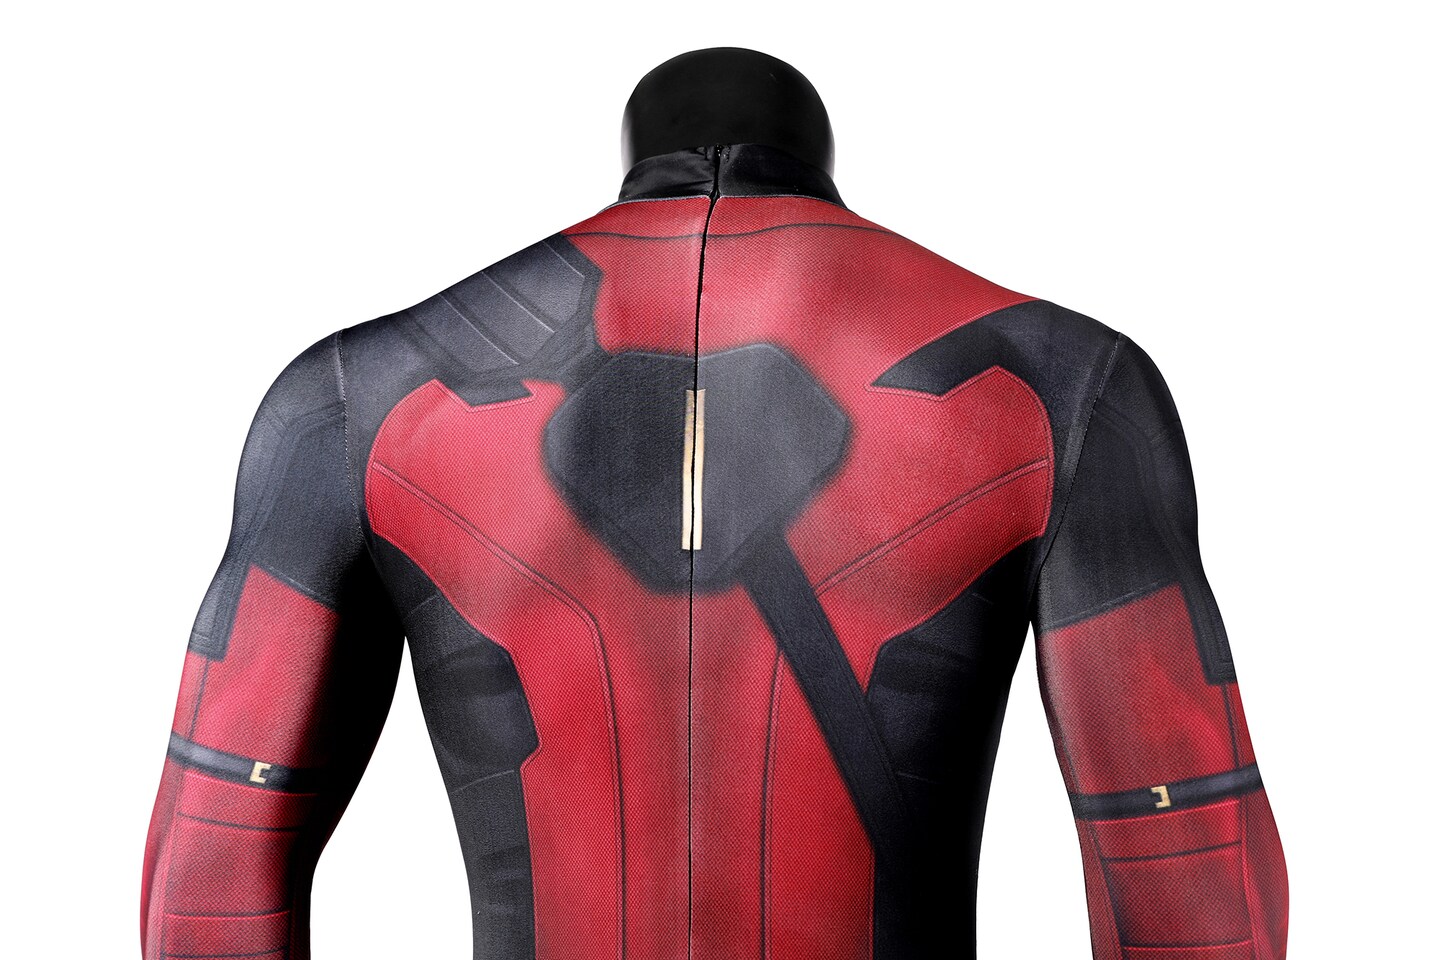 High quality Deadpool Cosplay Costumes, available in a variety of styles